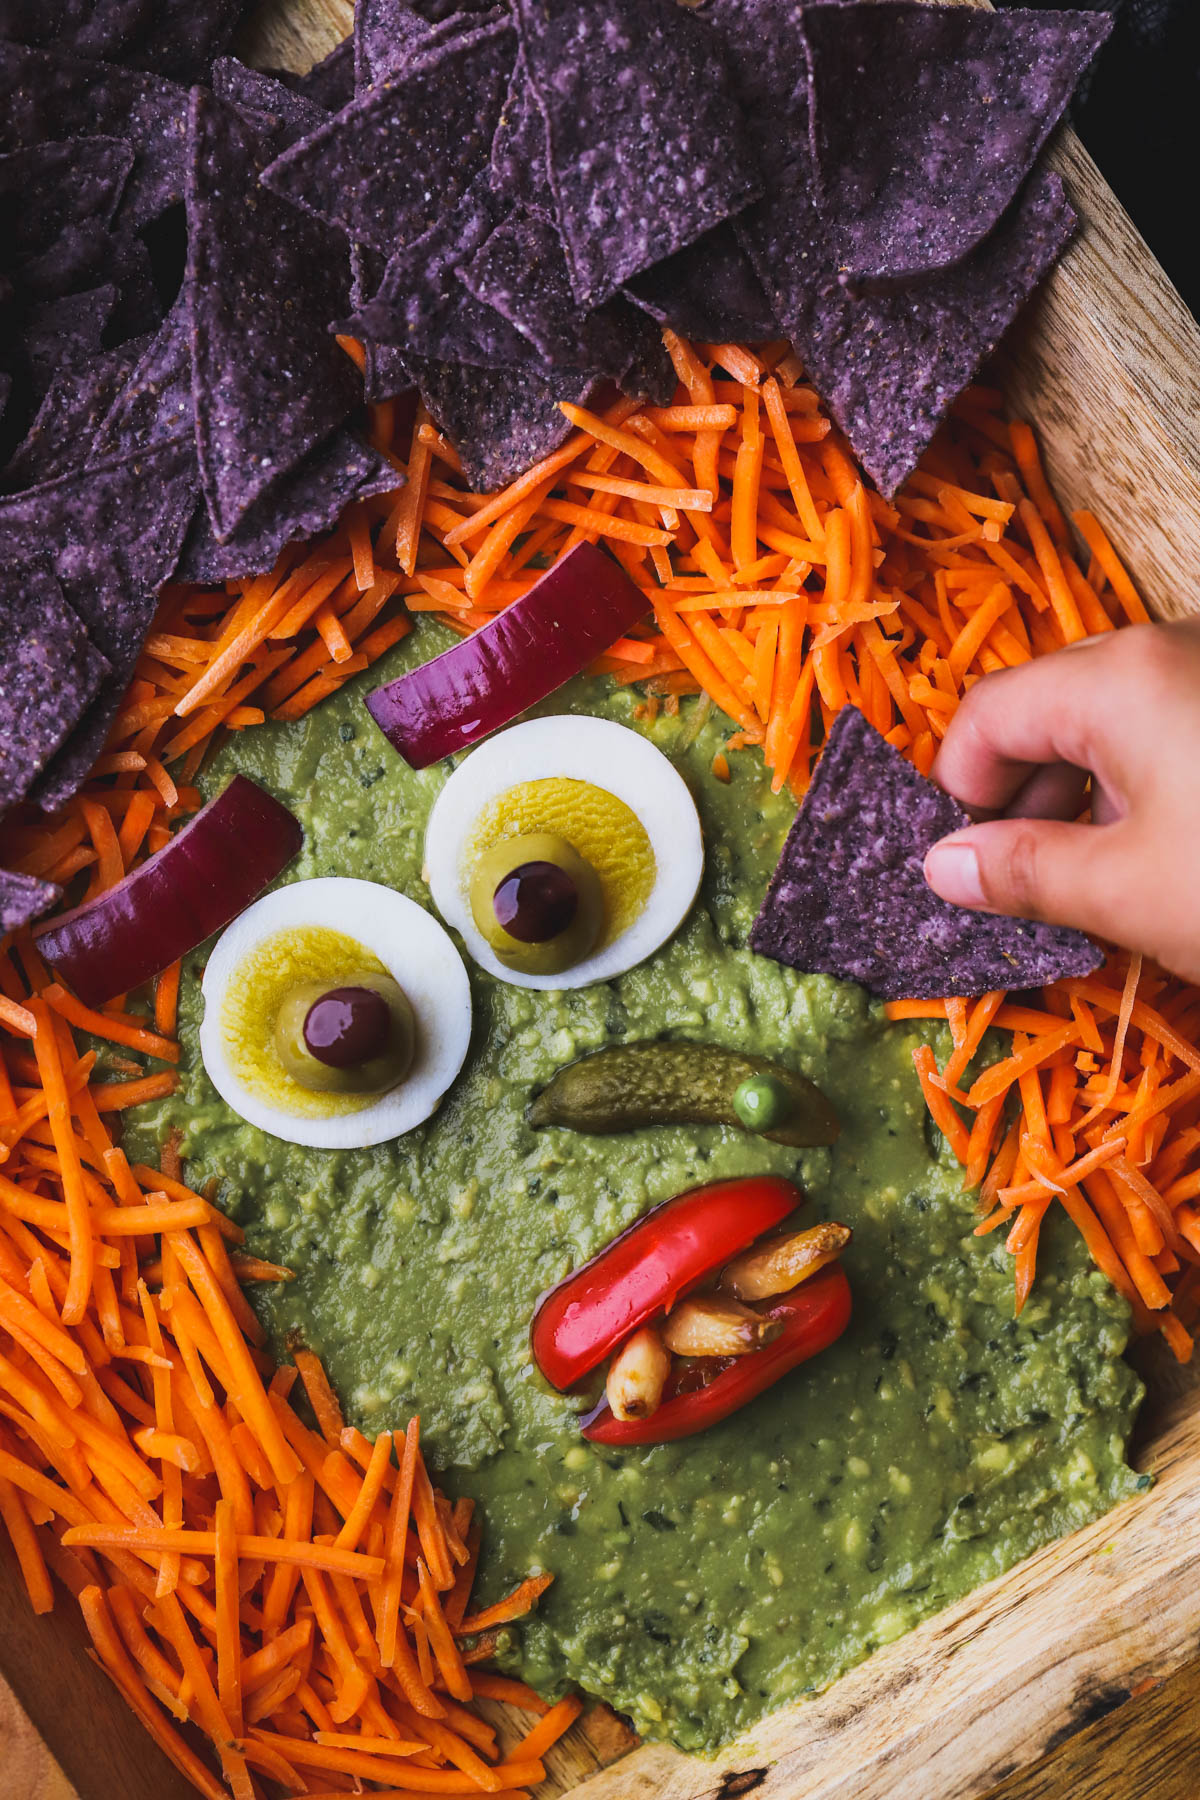 4 ingredient guacamole shaped into a spooky witches face.  